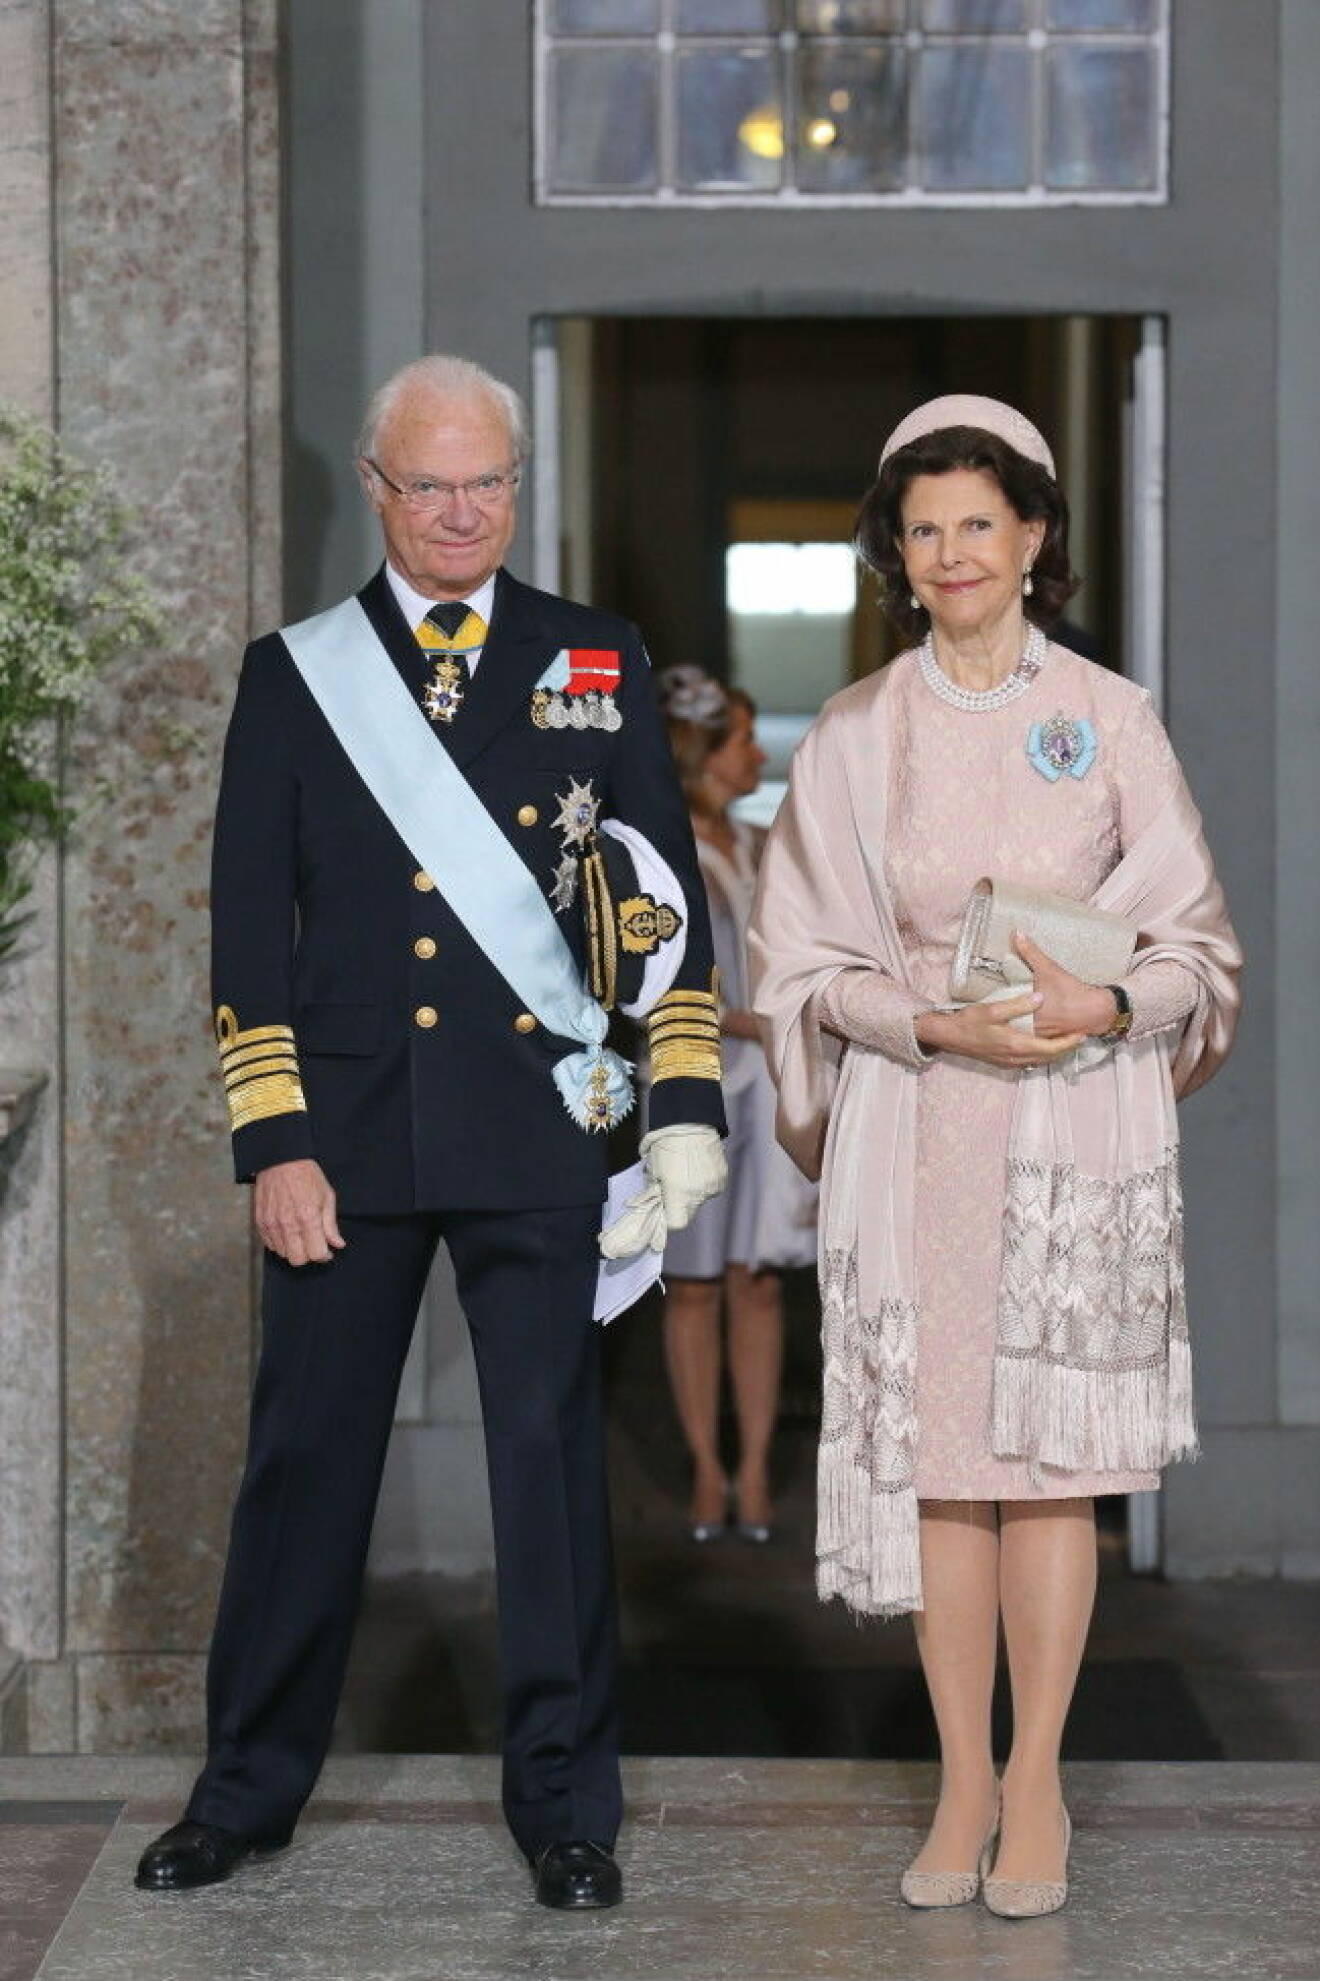 Royals and guests at Christening of Prince Oscar in Stockholm, 27.05.2016. Picture shows: King Carl-Gustaf XVI and Queen Silvia of Sweden © EPS/insight media COPYRIGHT STELLA PICTURES